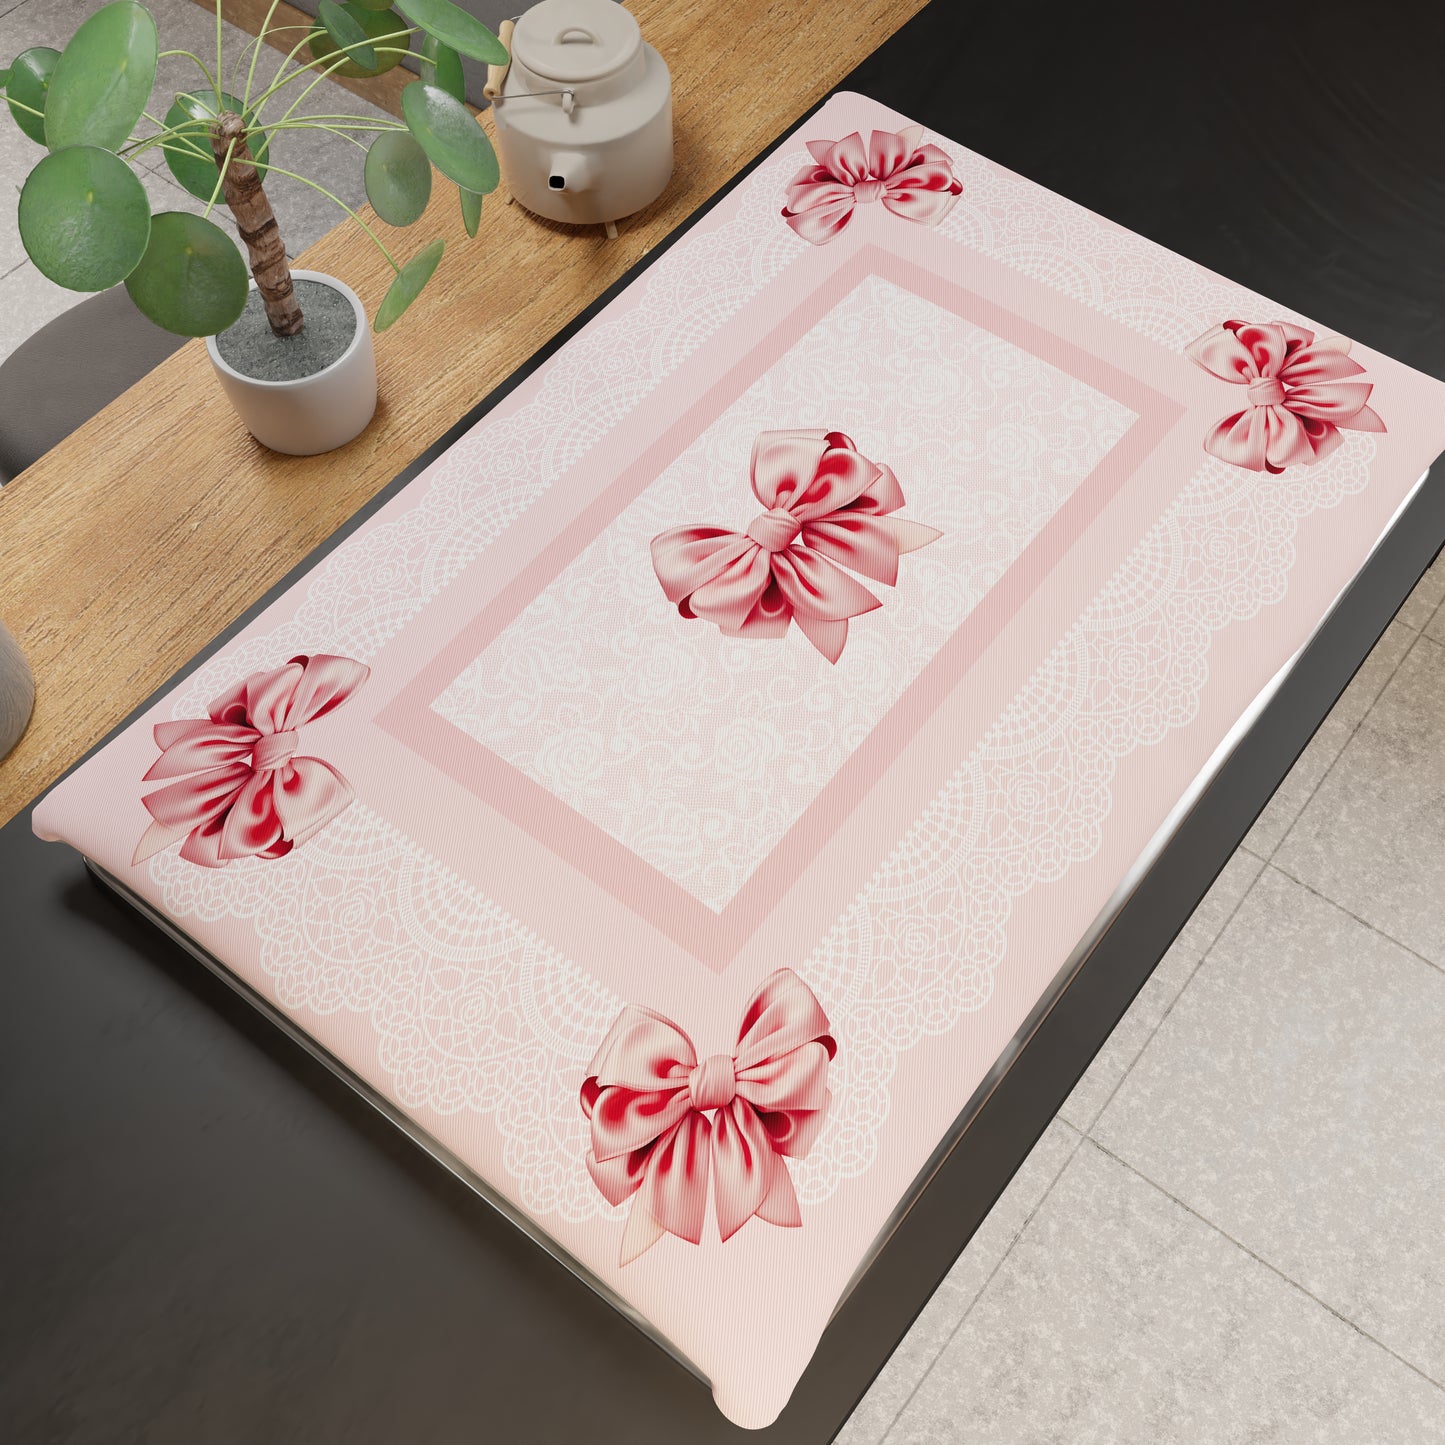 Kitchen Stove Cover in Digital Print Bow 1pc 46x70cm